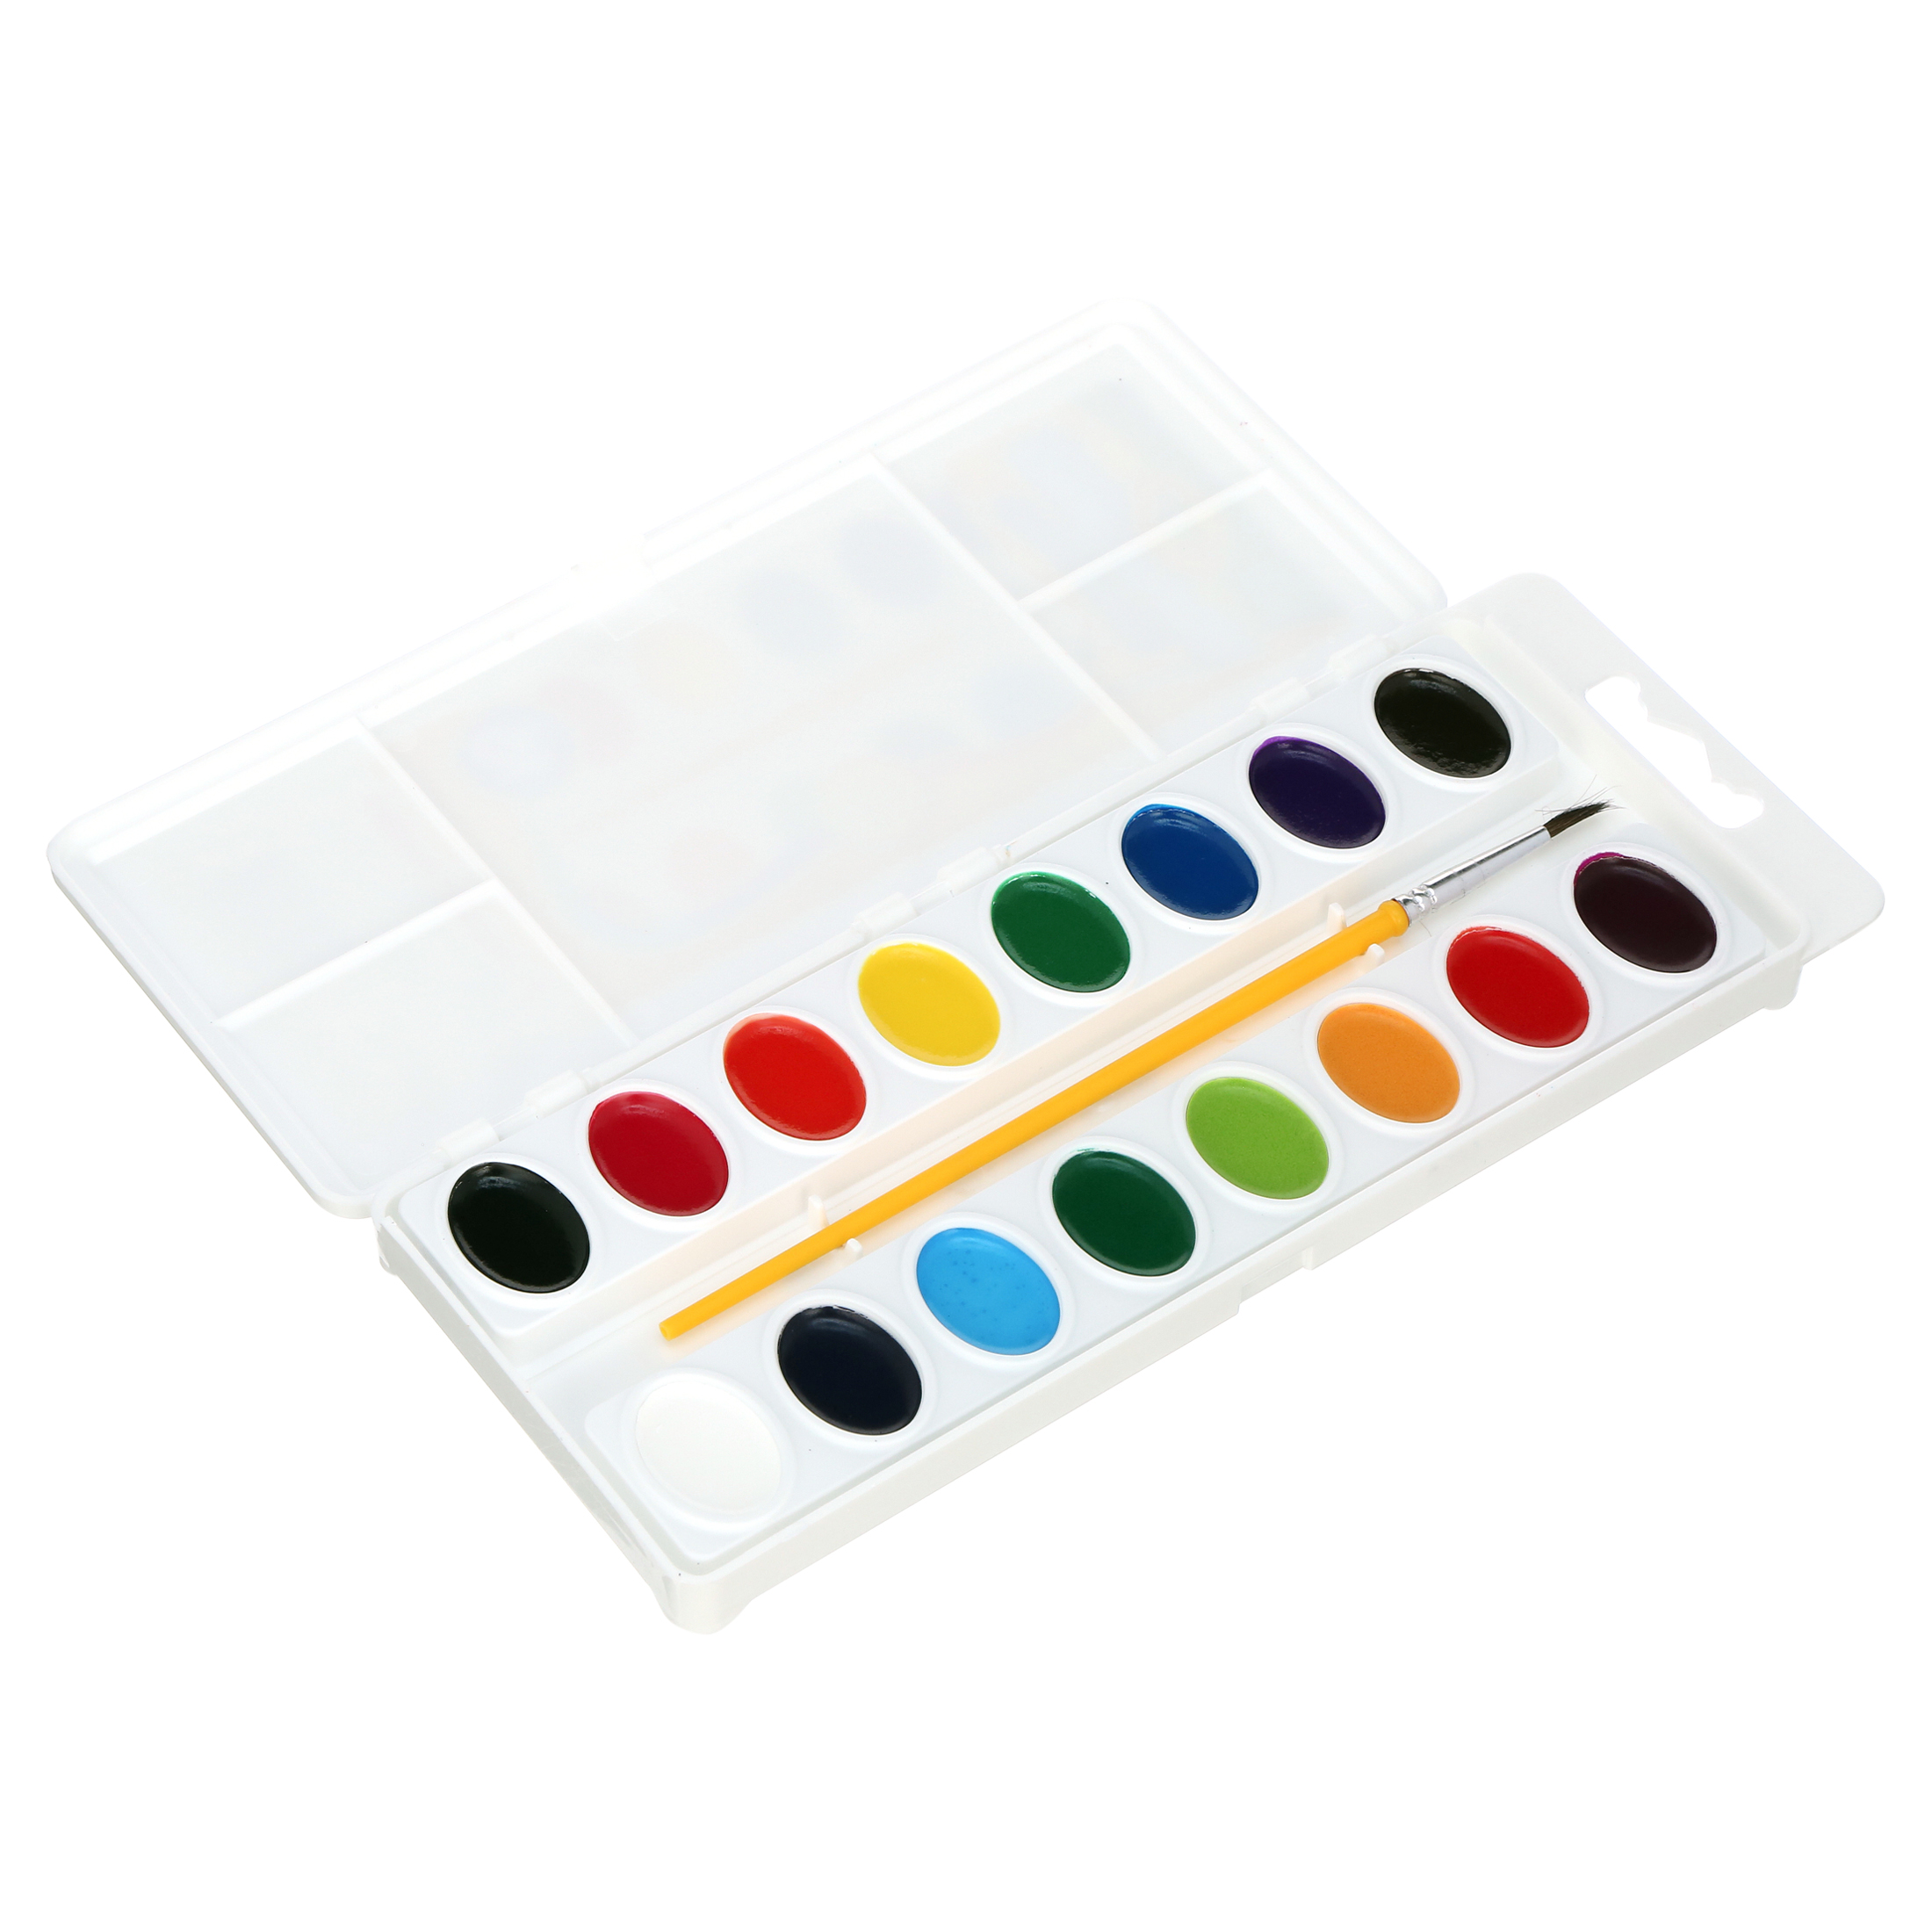 Crayola Washable Watercolor Set, 16-Colors - image 3 of 6